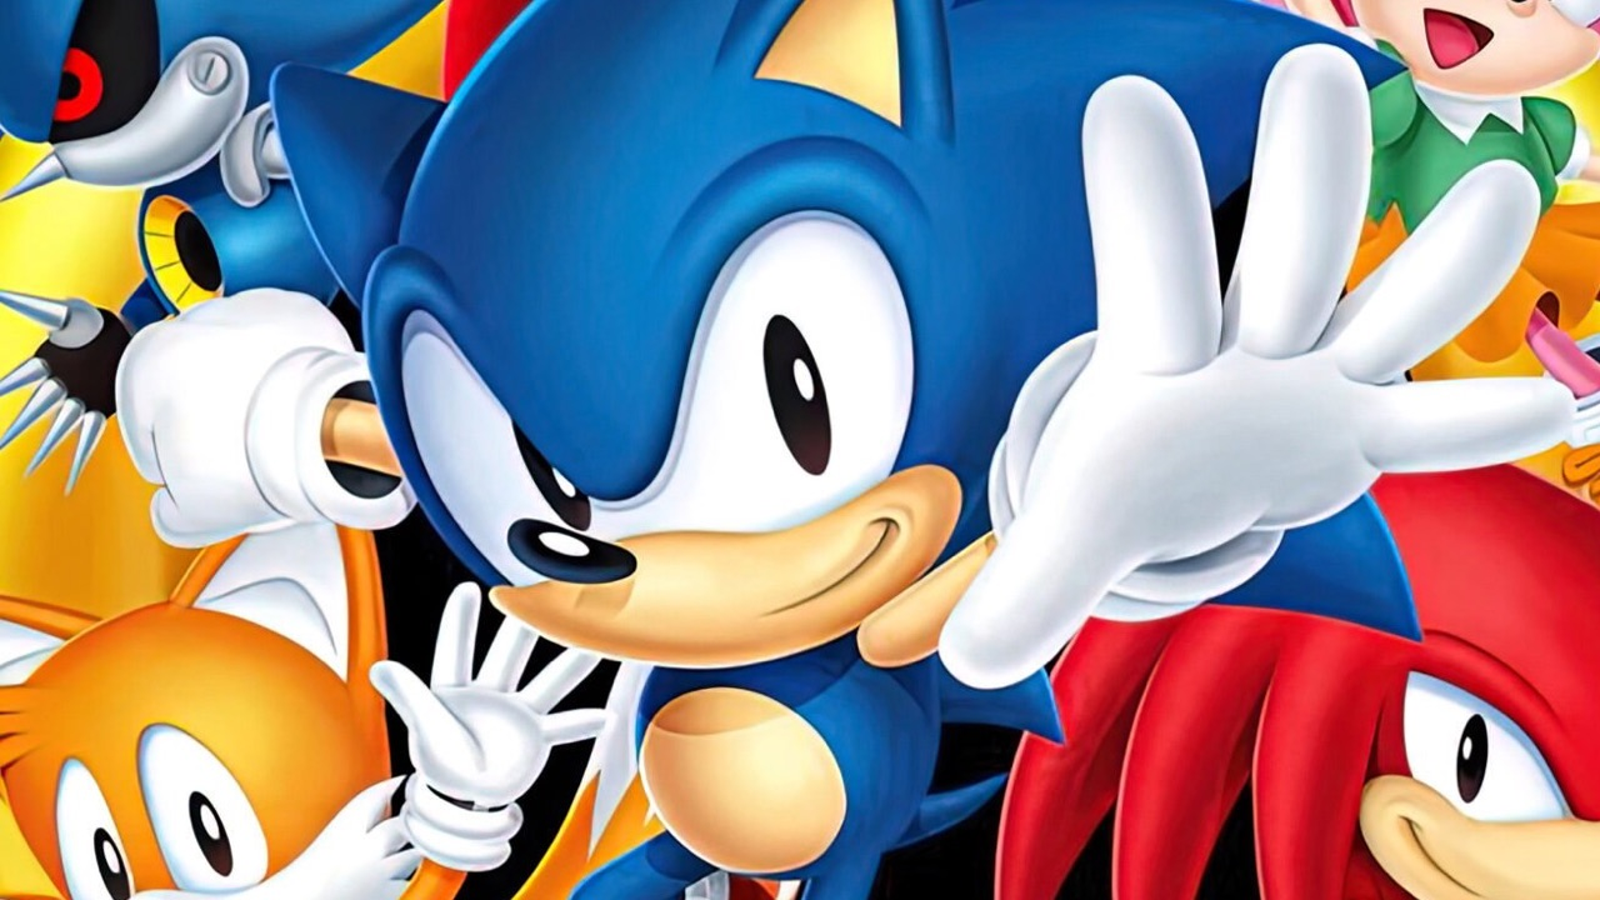 Would you rather see dark sonic or hyper sonic appear in the